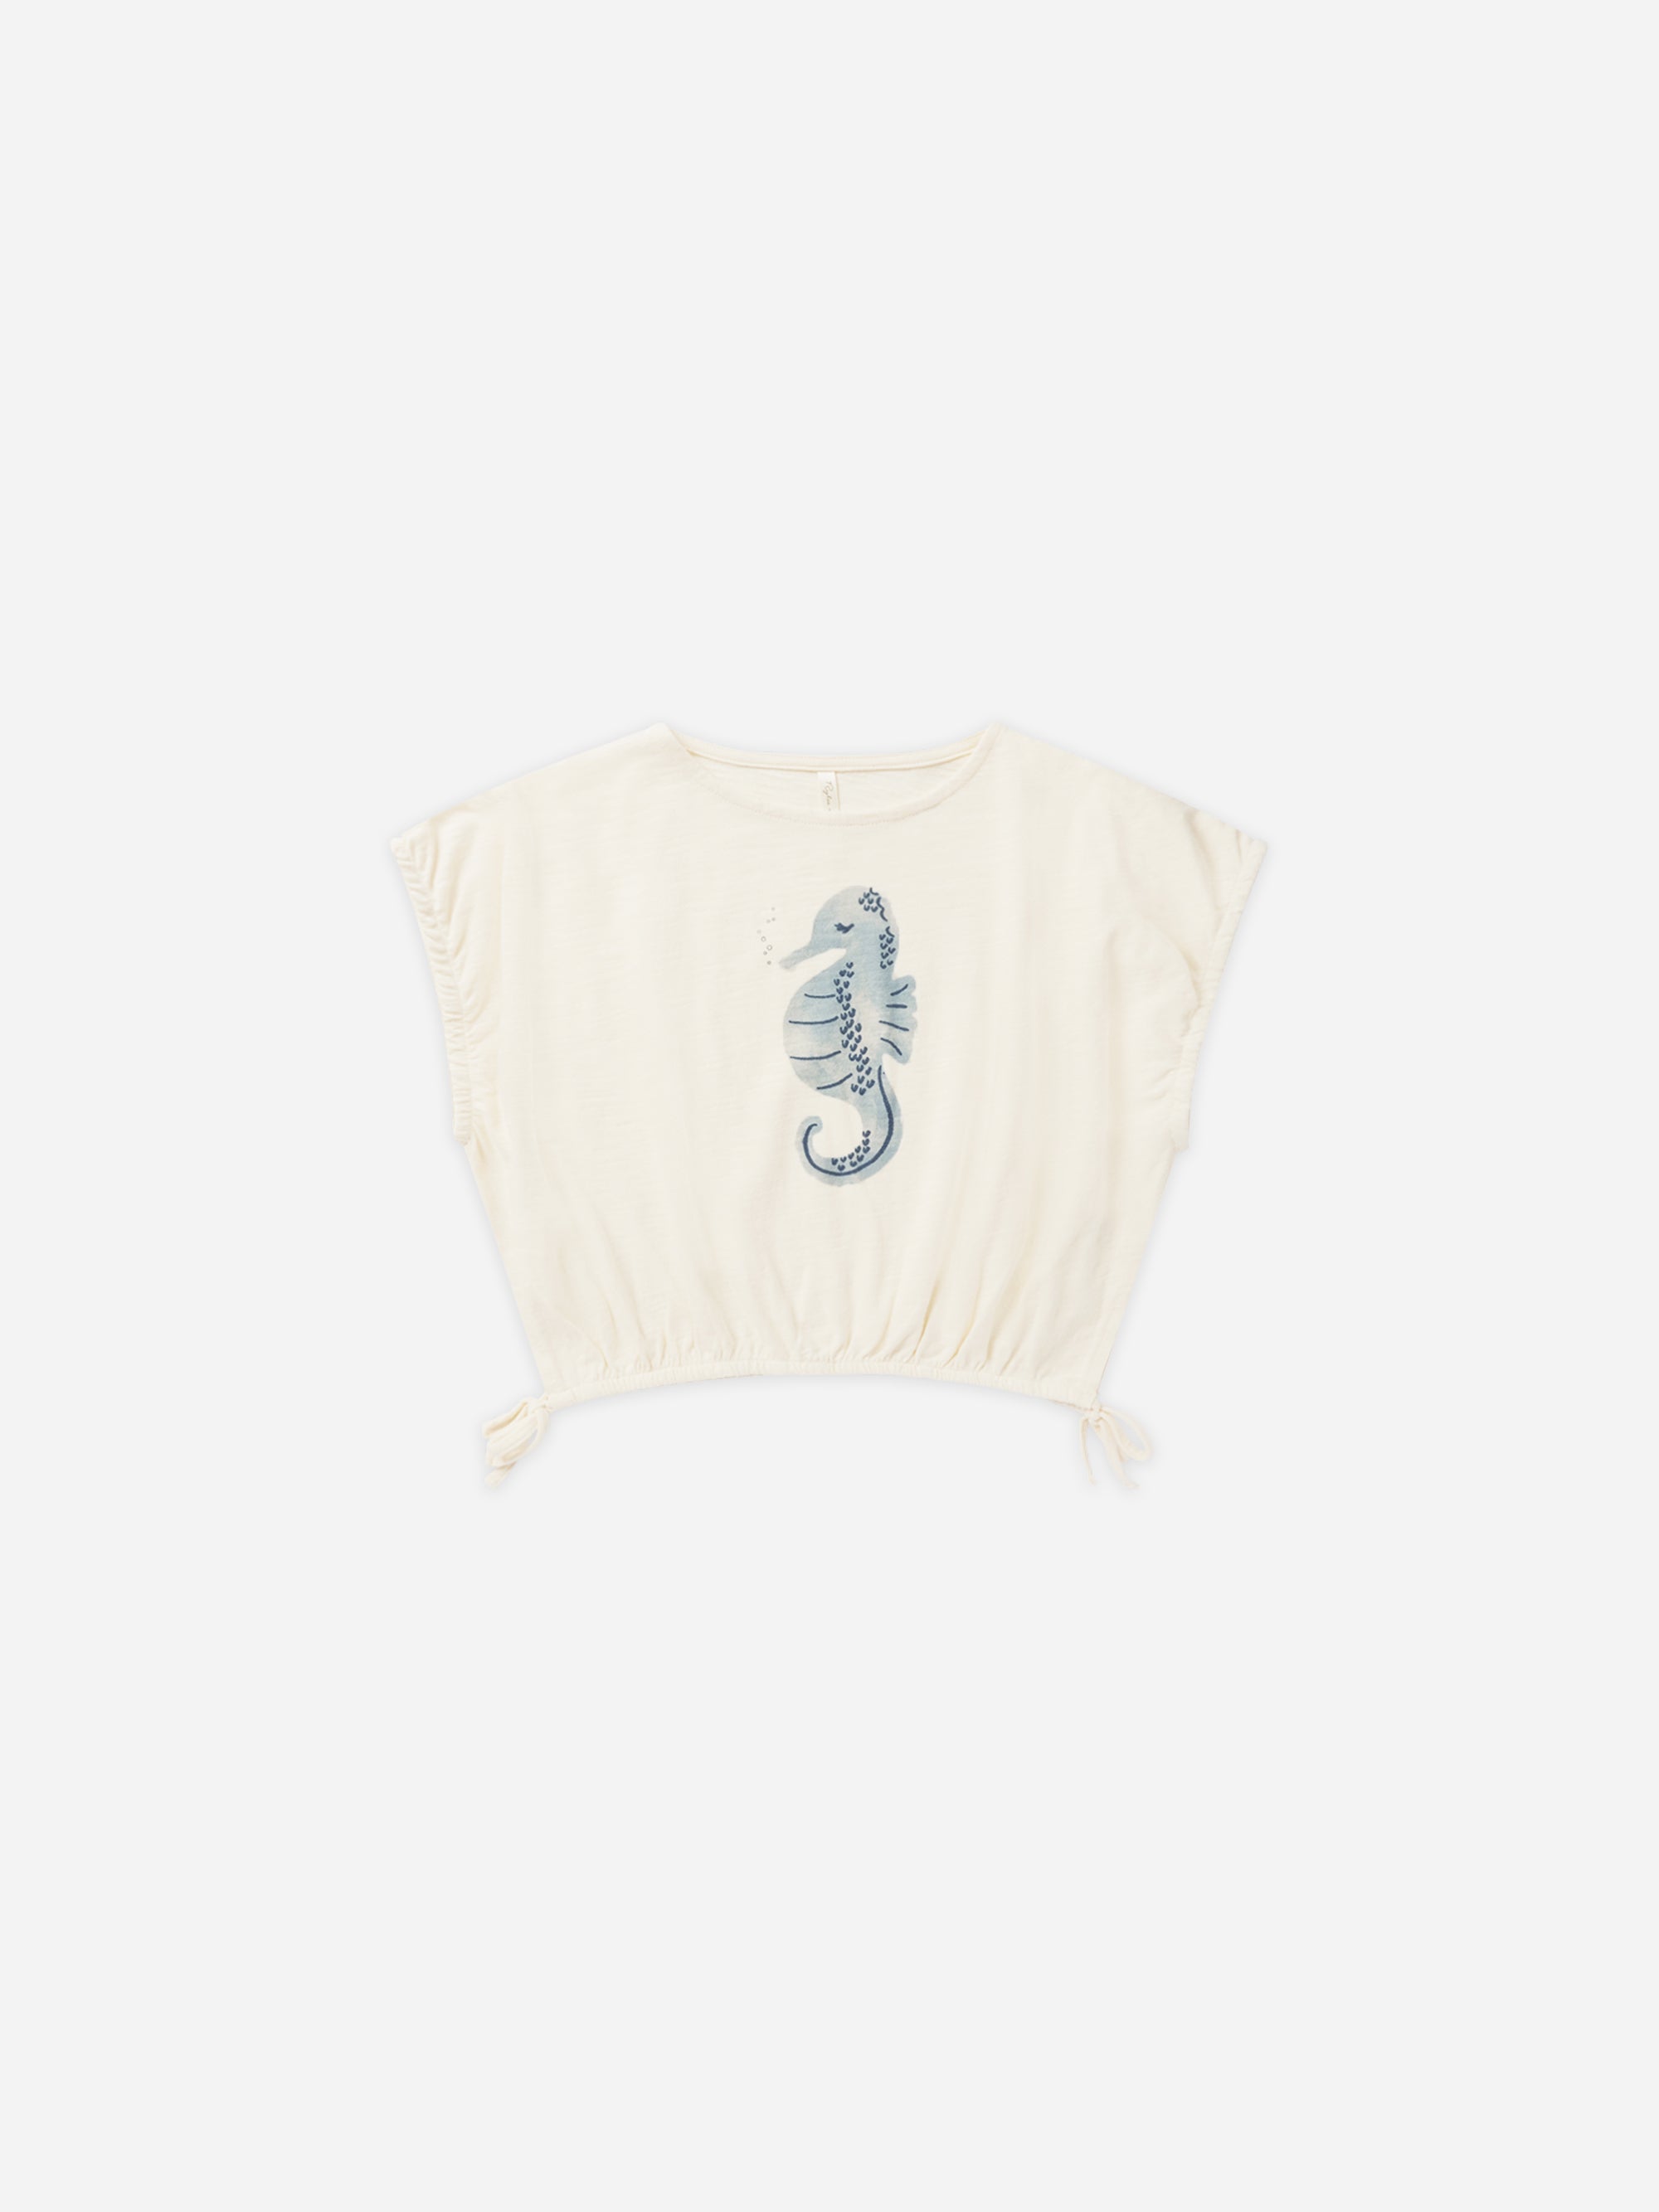 Cropped Cinched Tee || Seahorse